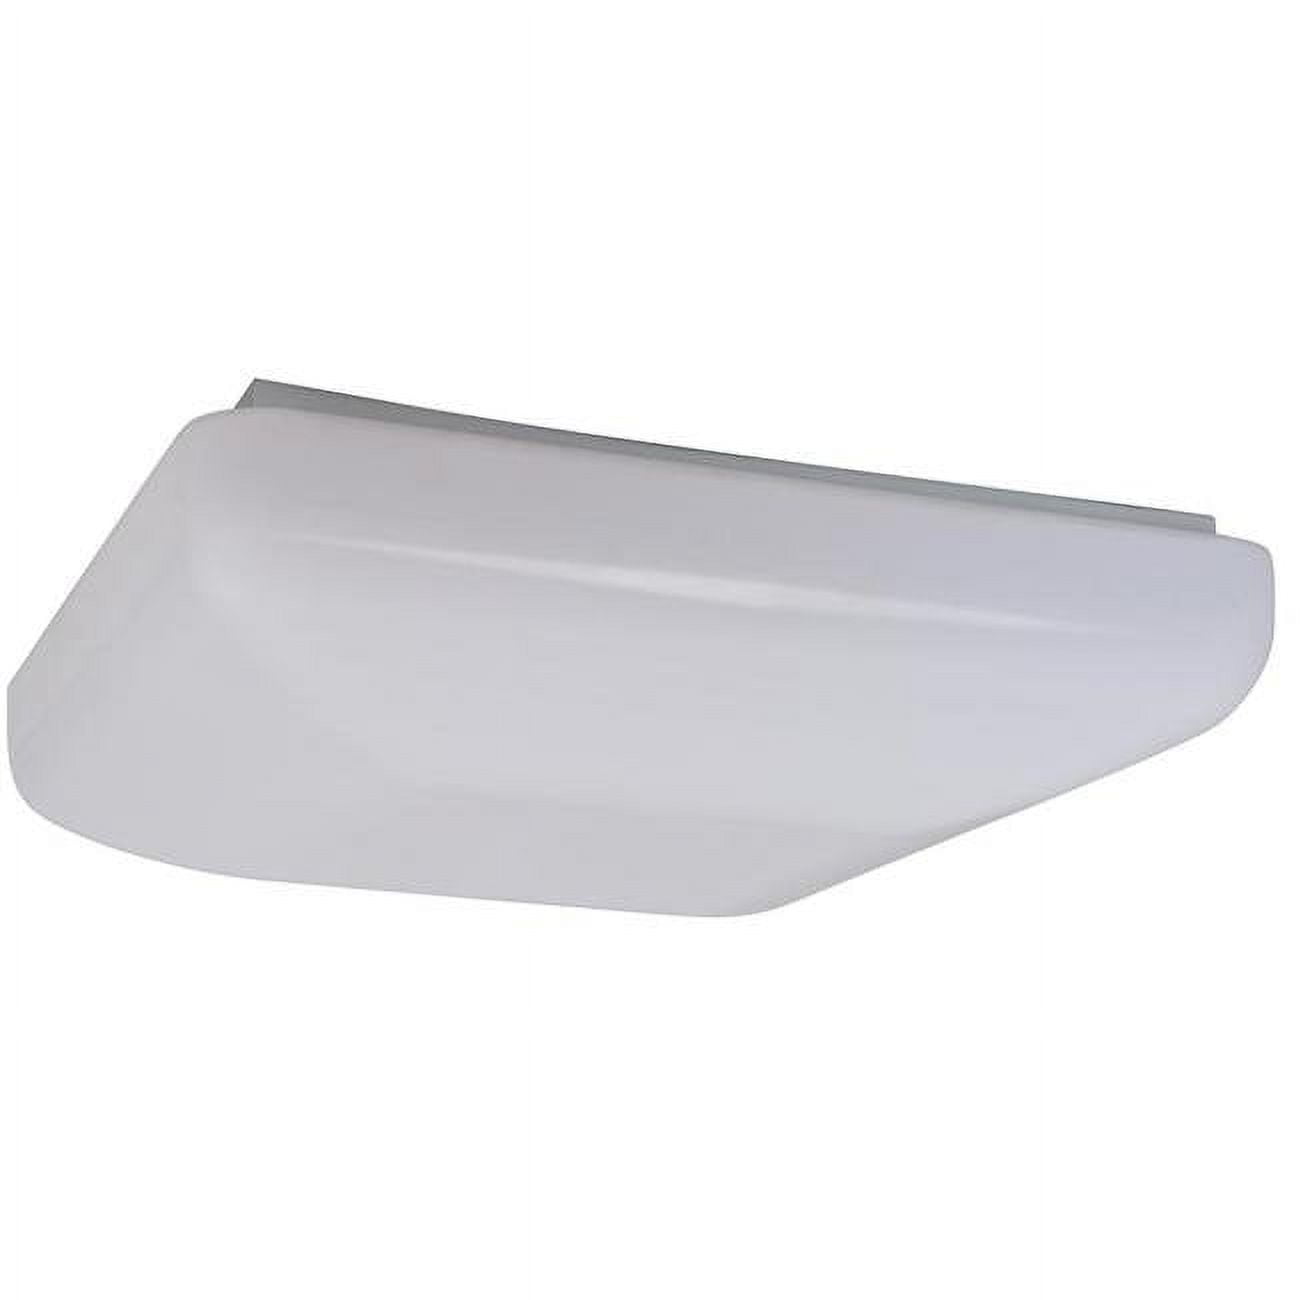 Led-s003l 19.5 X 3.5 In. Led Ceiling Fixture Square - White